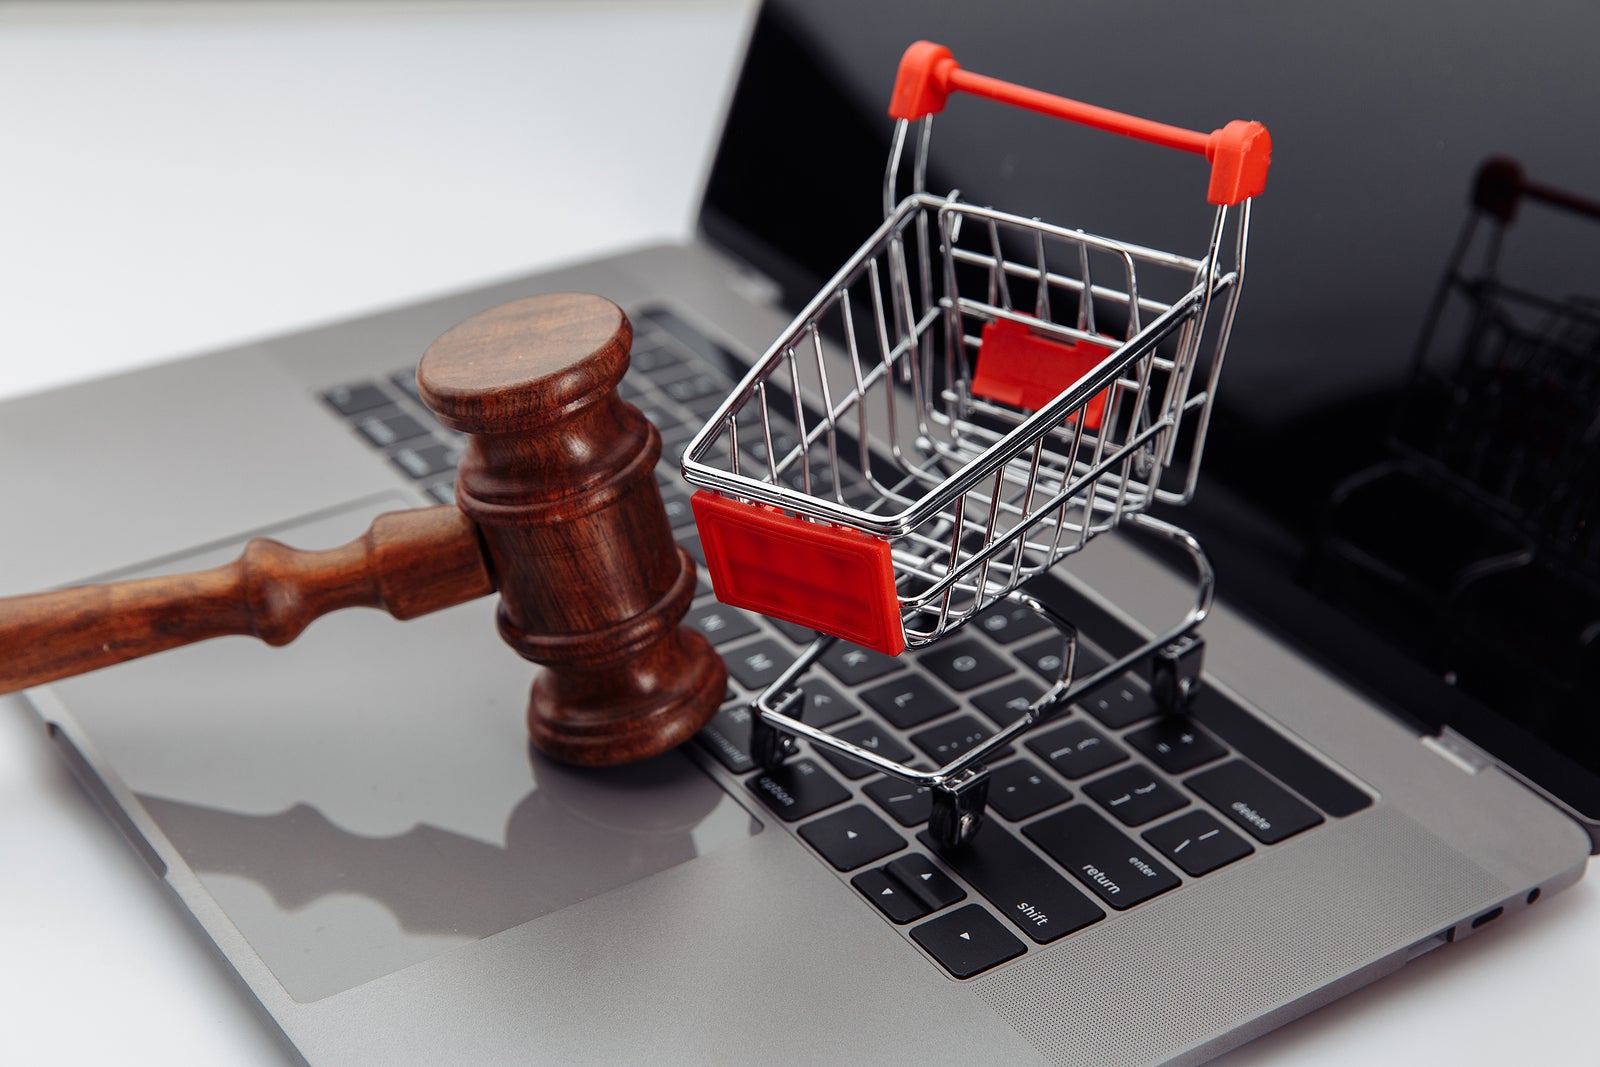 Laptop keyboard , shopping cart and auction hammer on table, online auction concept